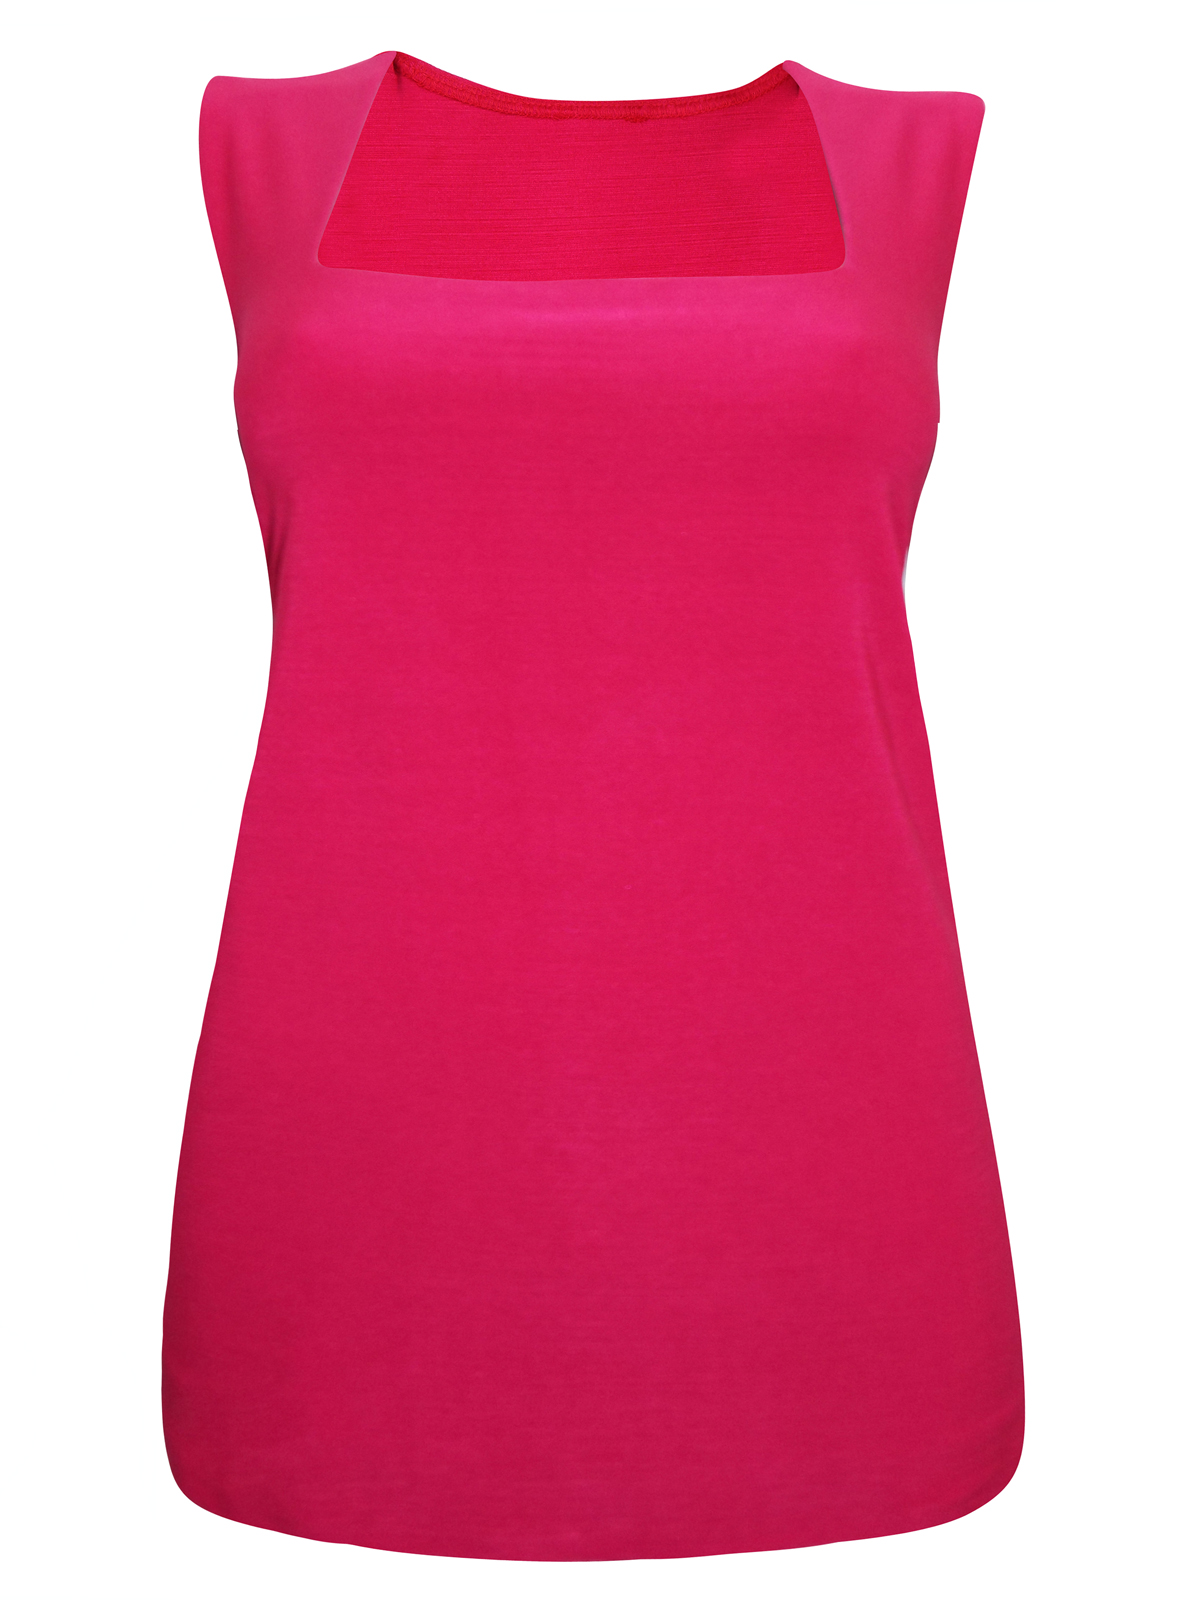 Ann Harv3y HOT-PINK Sleeveless Square Neck Top - Plus Size 16 to 32